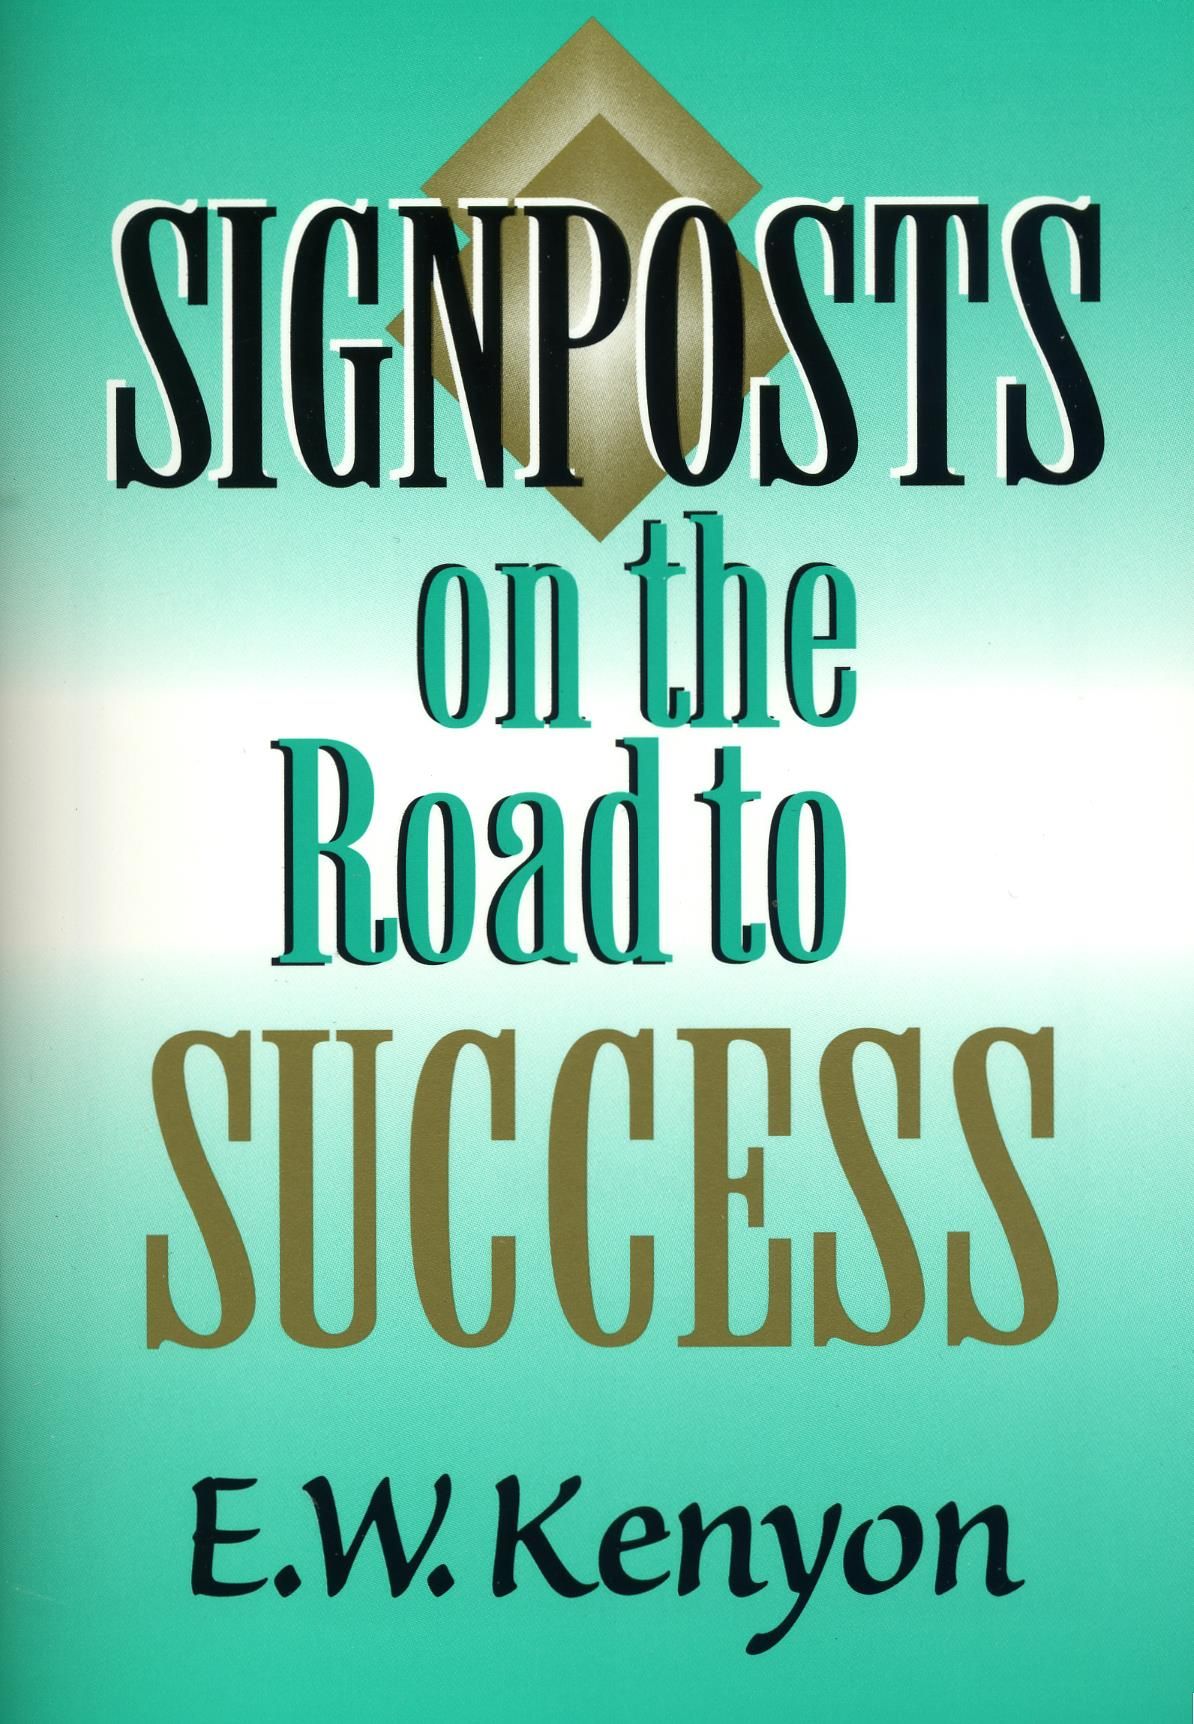 E.W. Kenyon: Signposts on the Road to Success